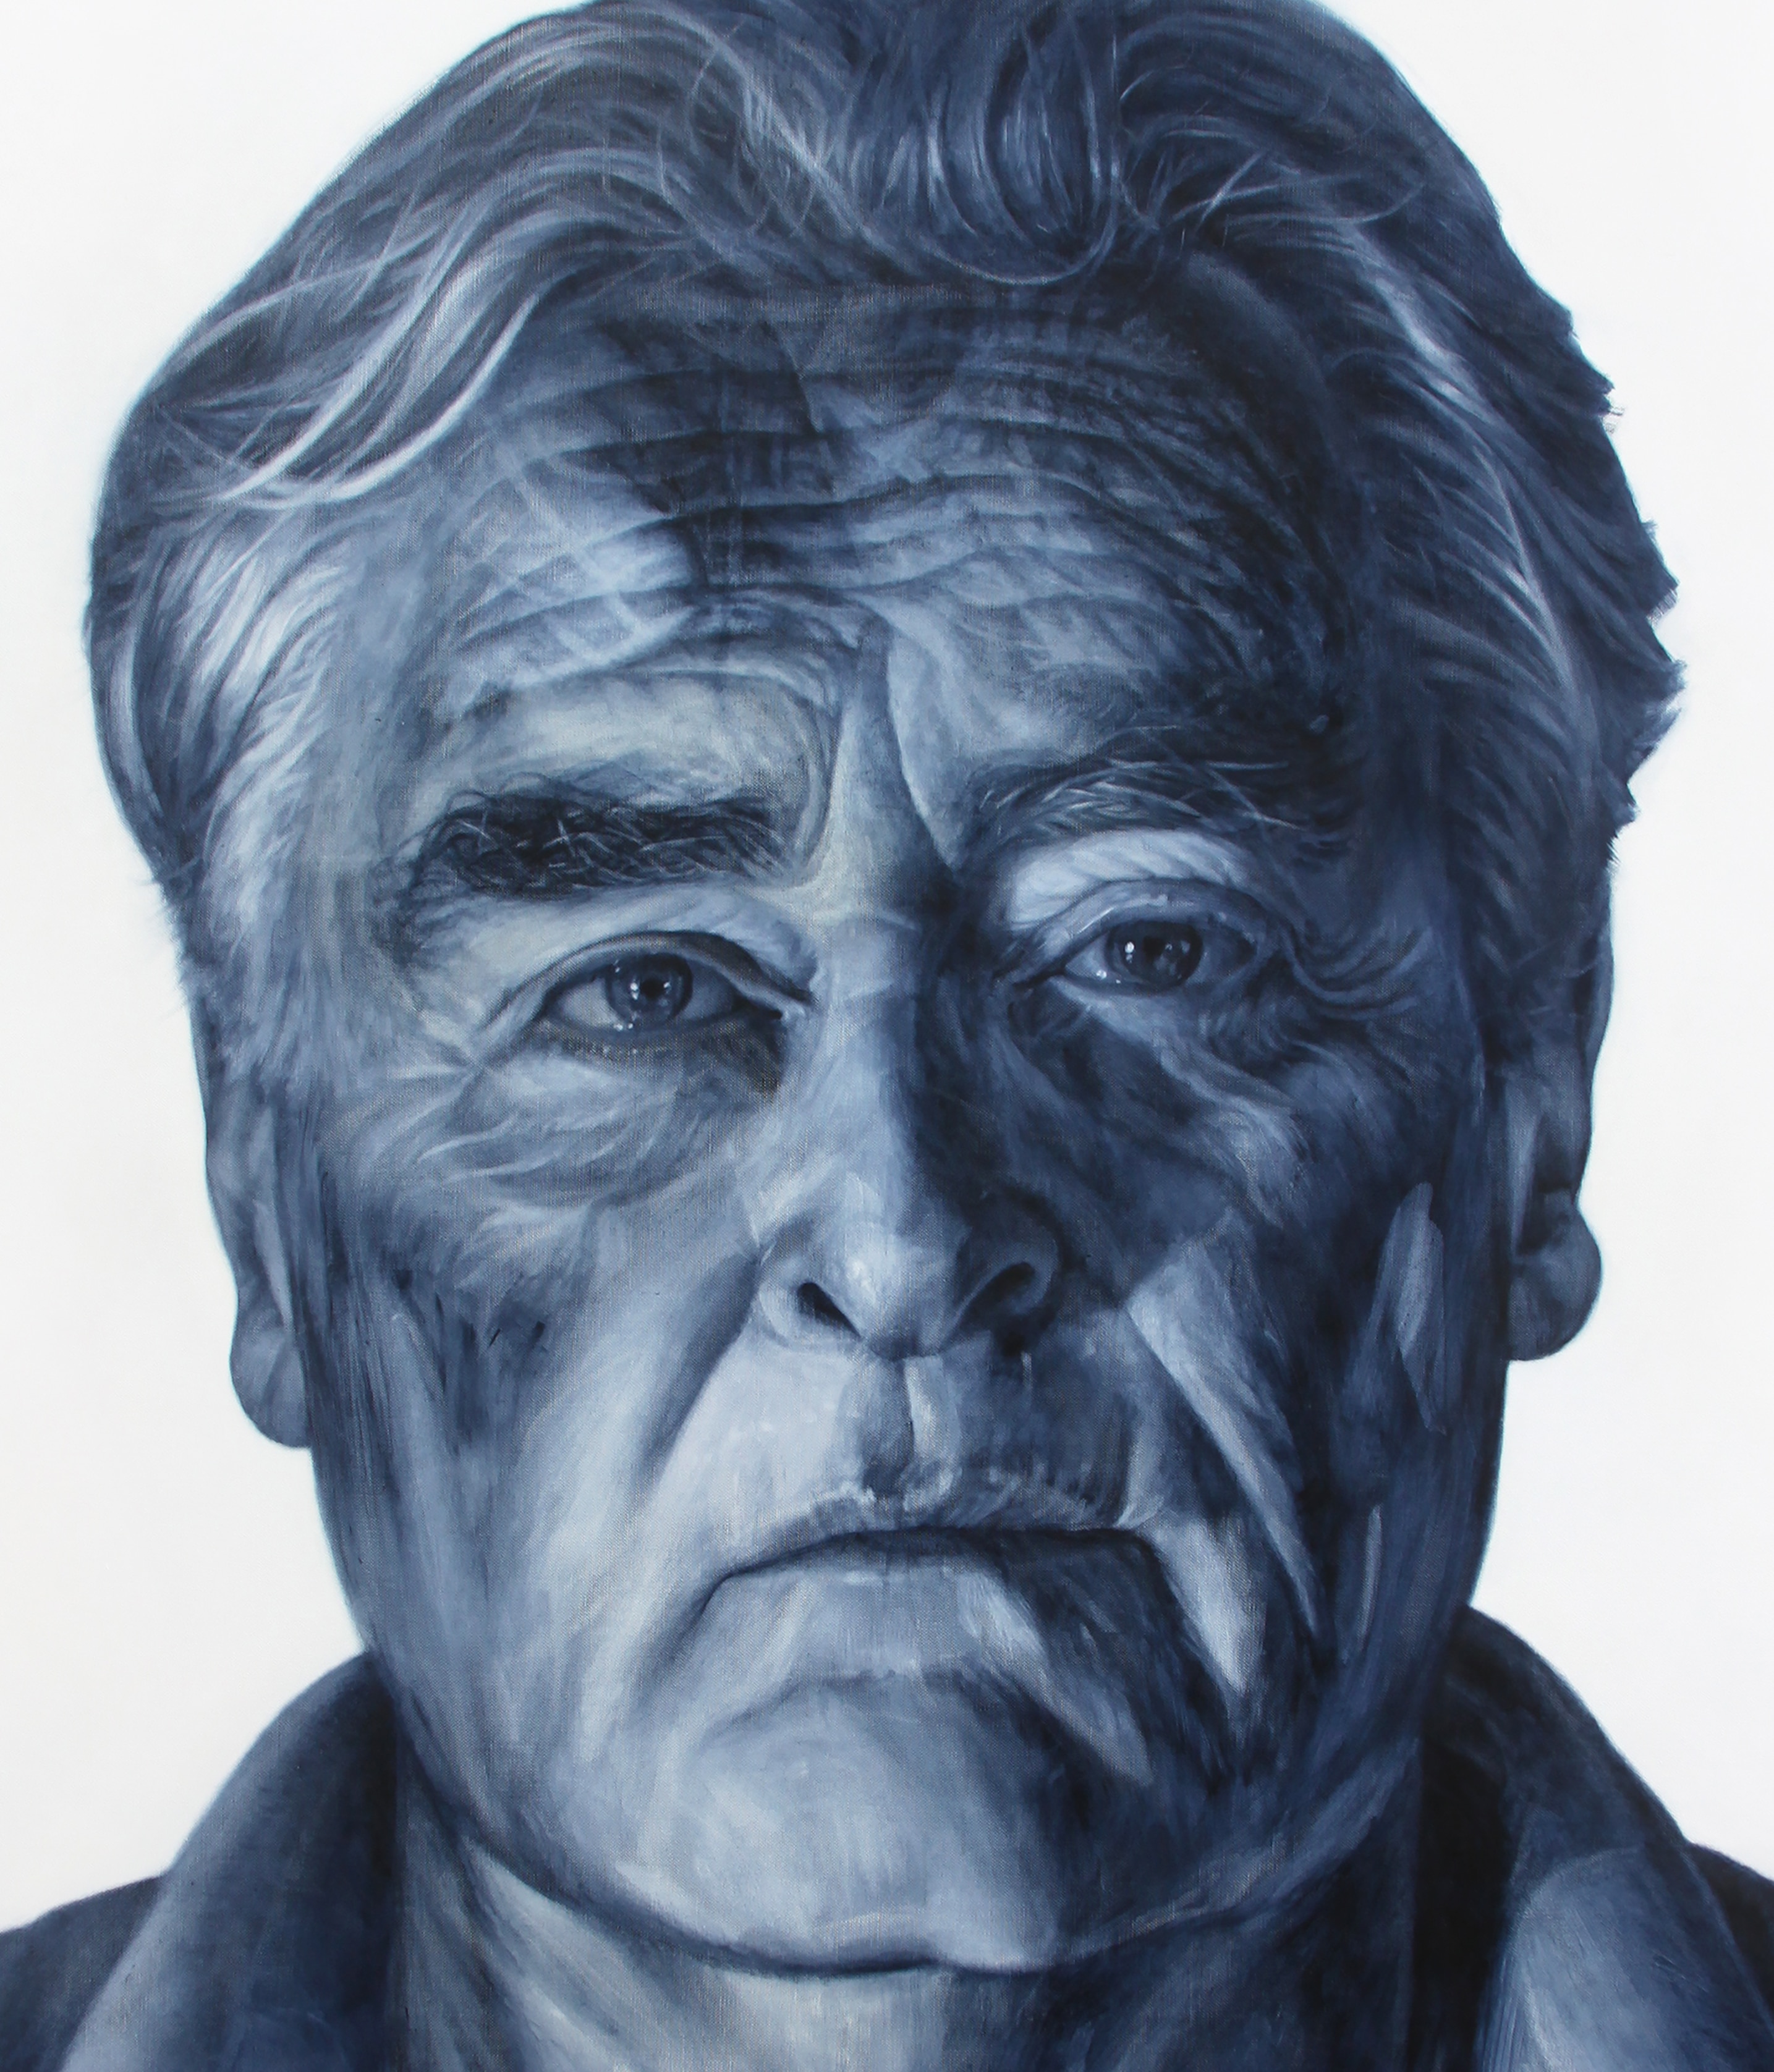 A painted portrait of actor John Howard in blue and grey tones